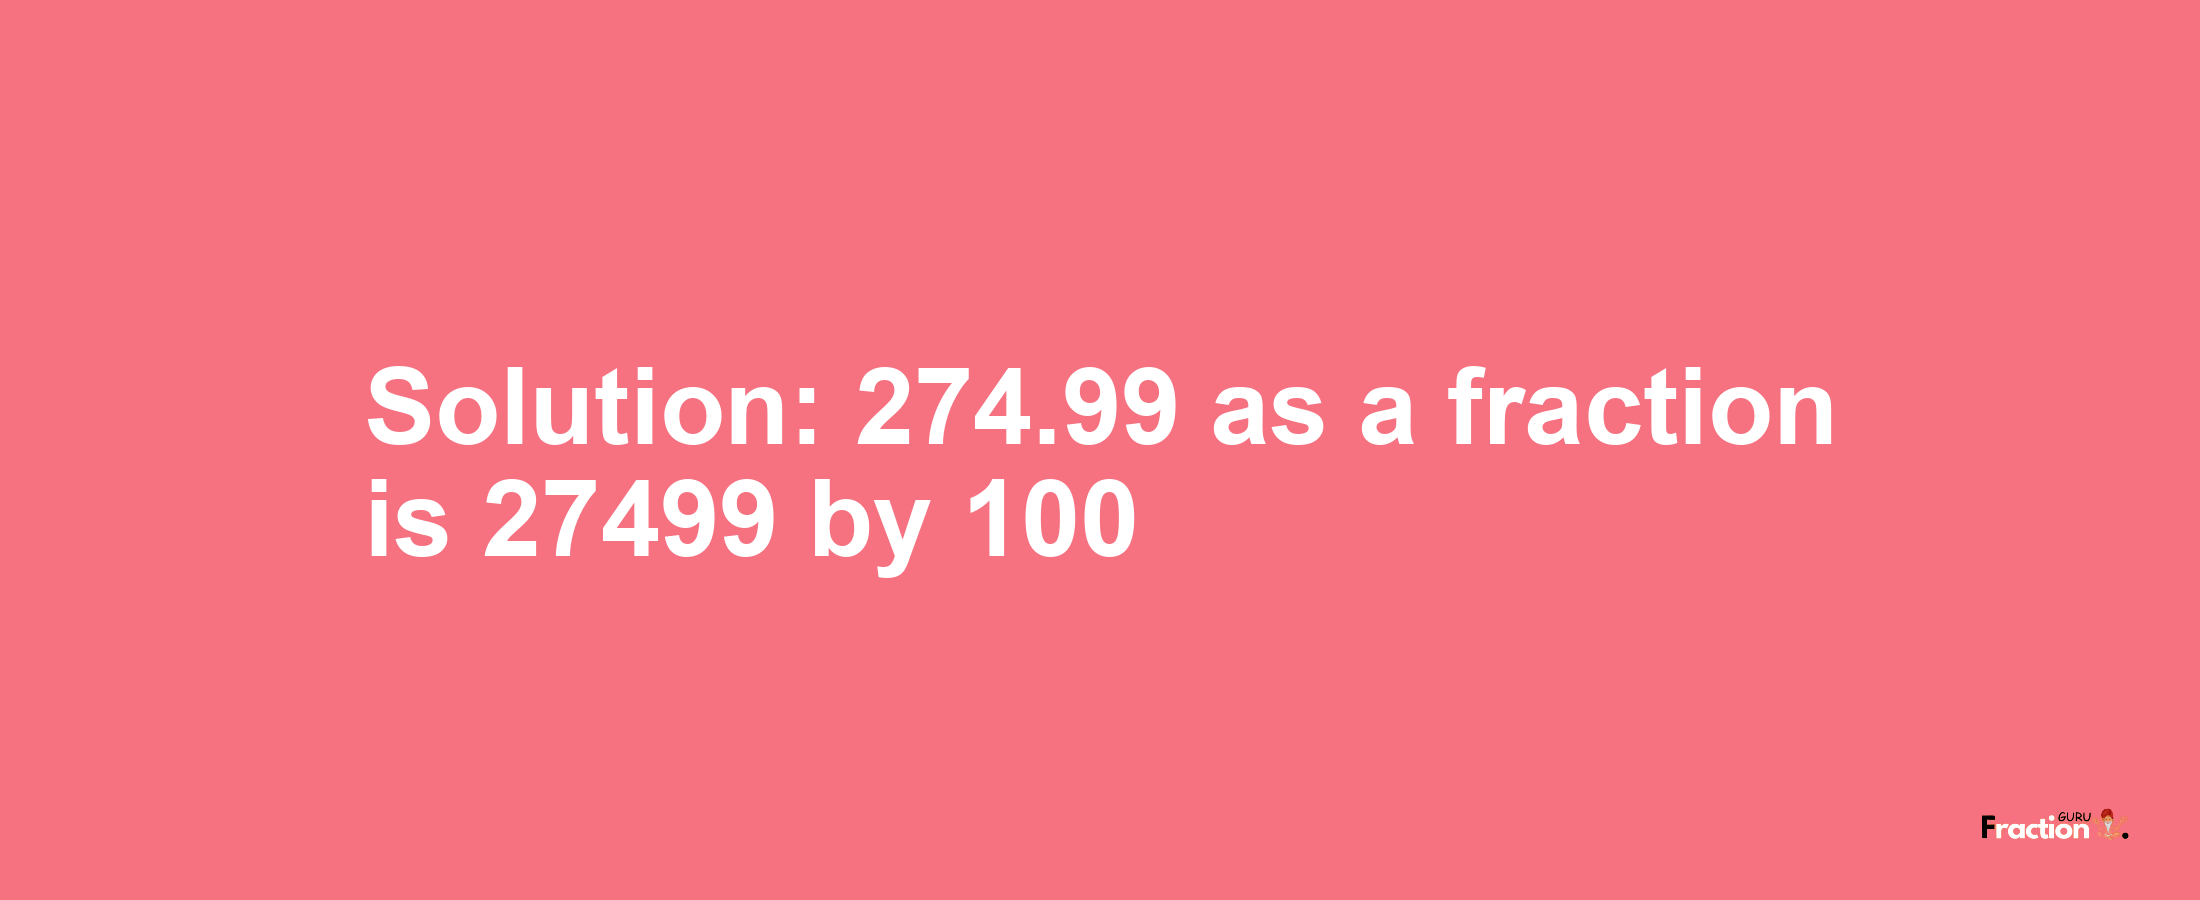 Solution:274.99 as a fraction is 27499/100